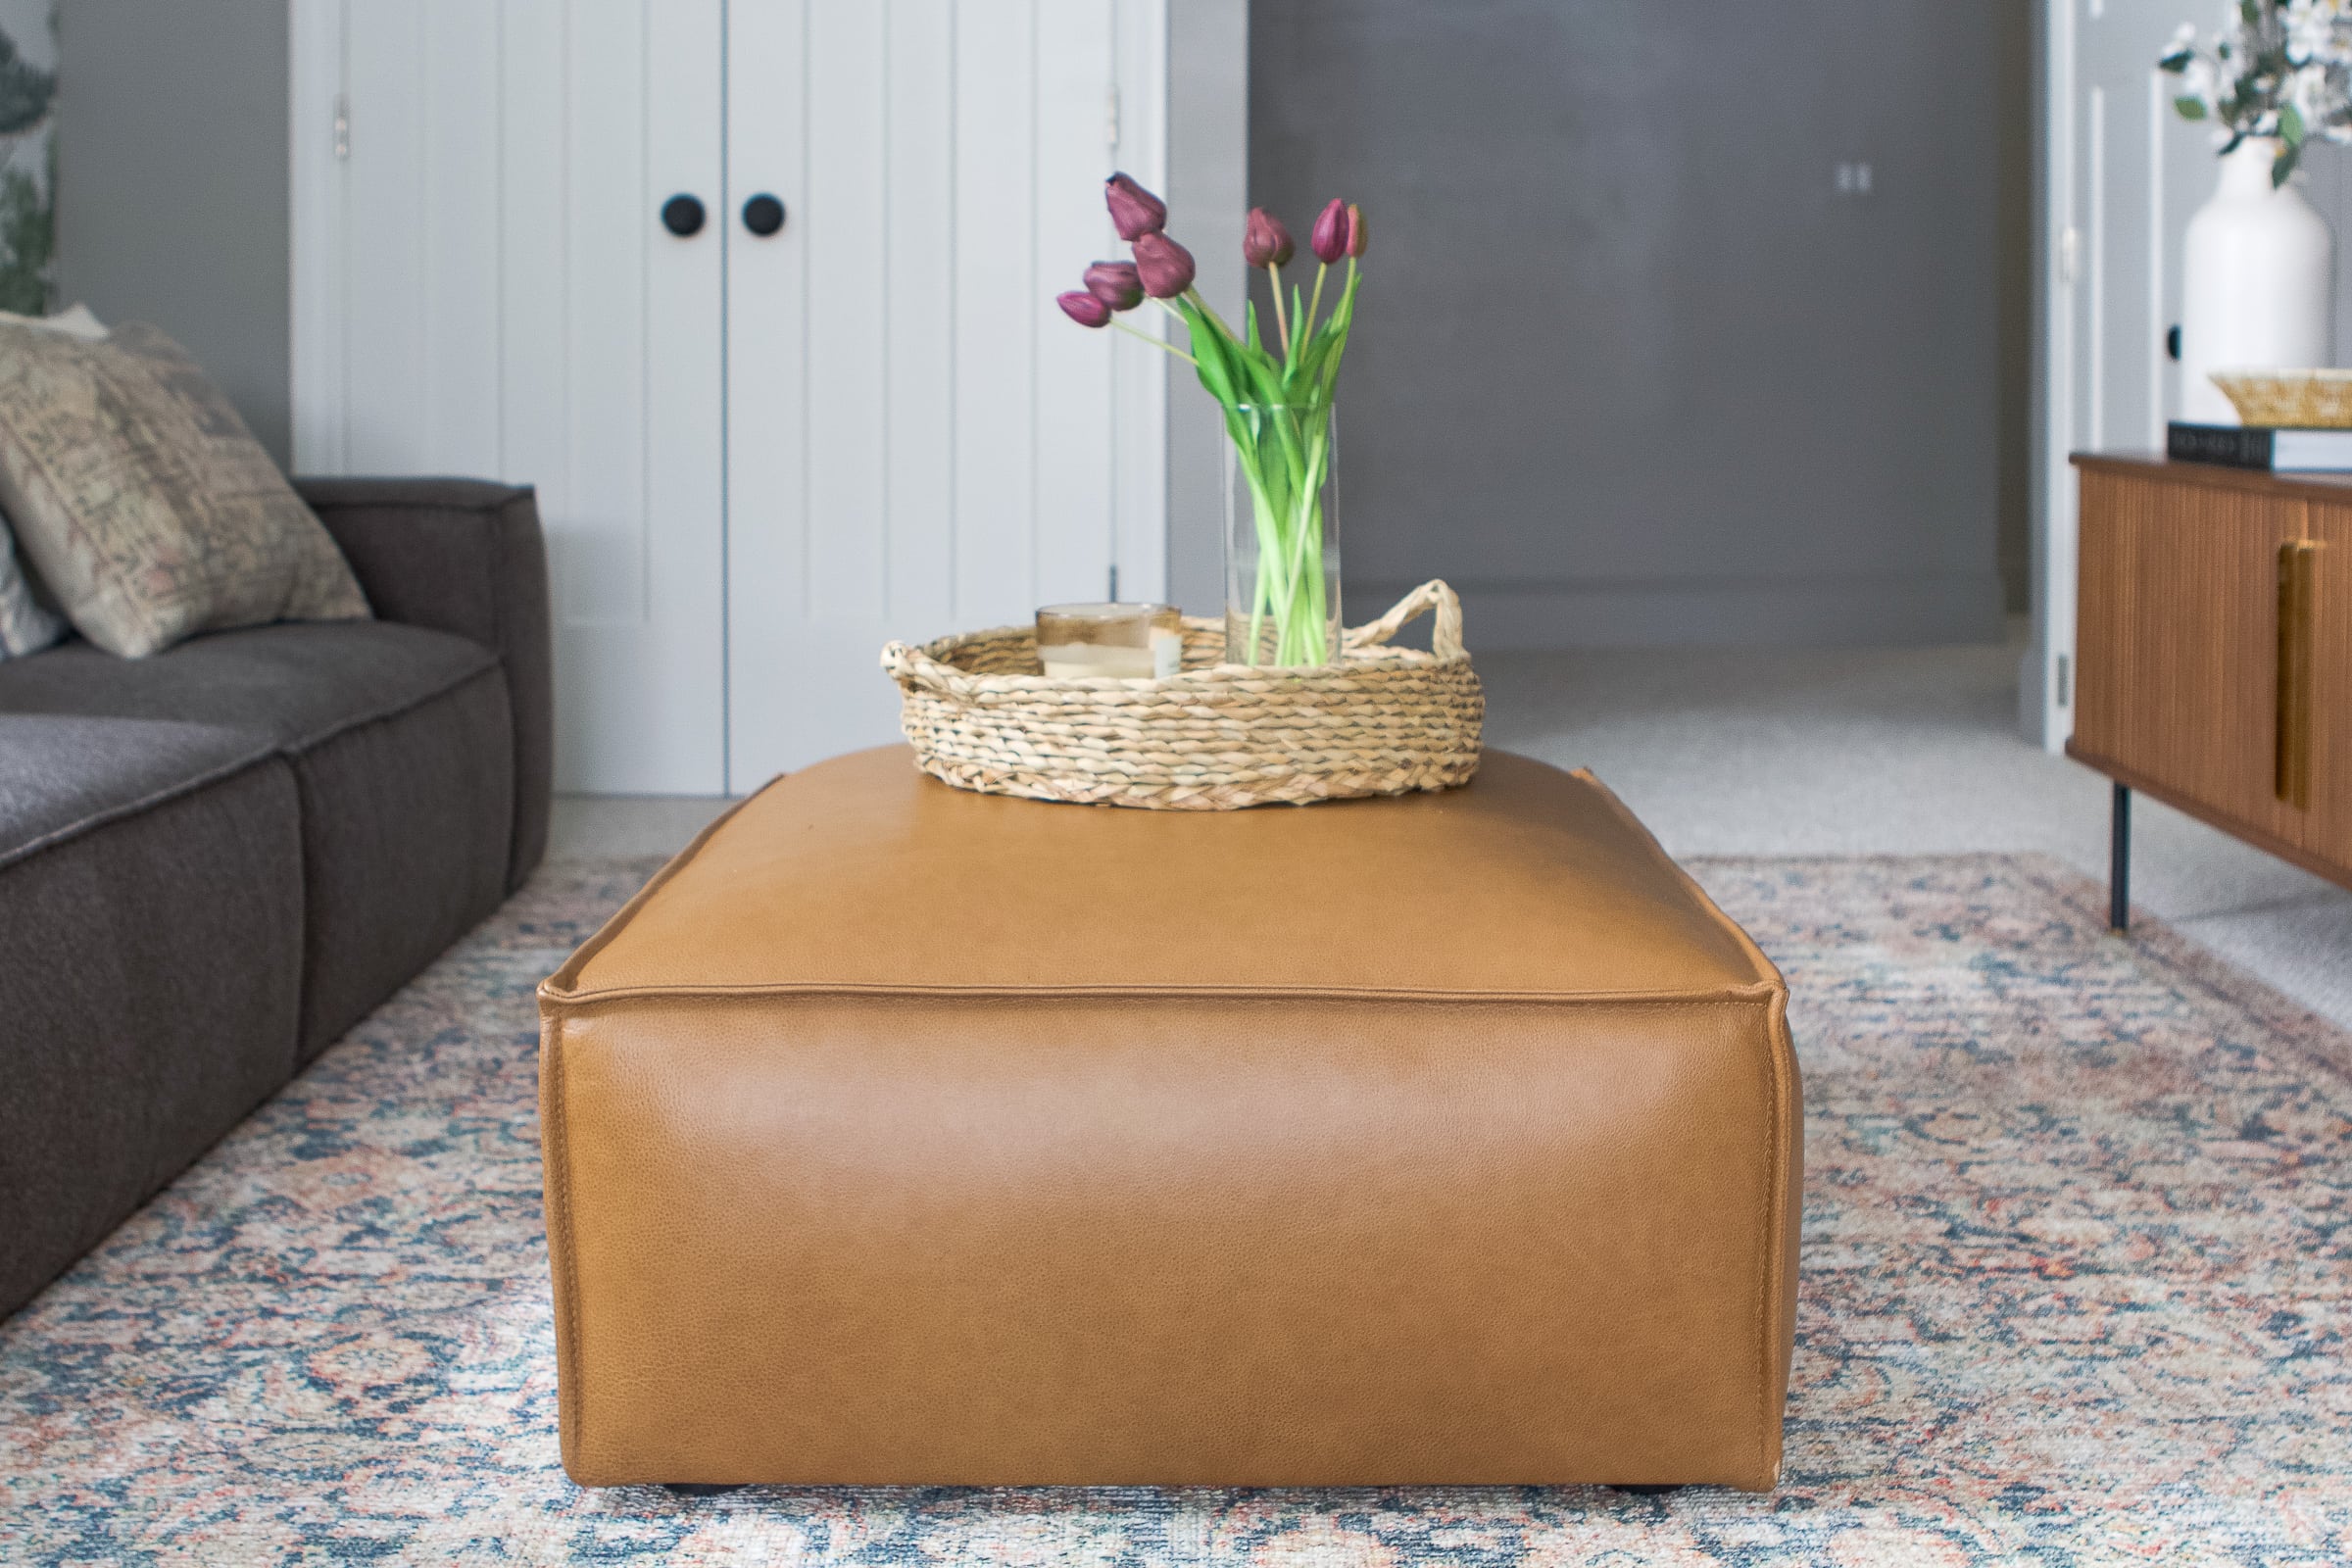 Our new leather ottoman from Castlery